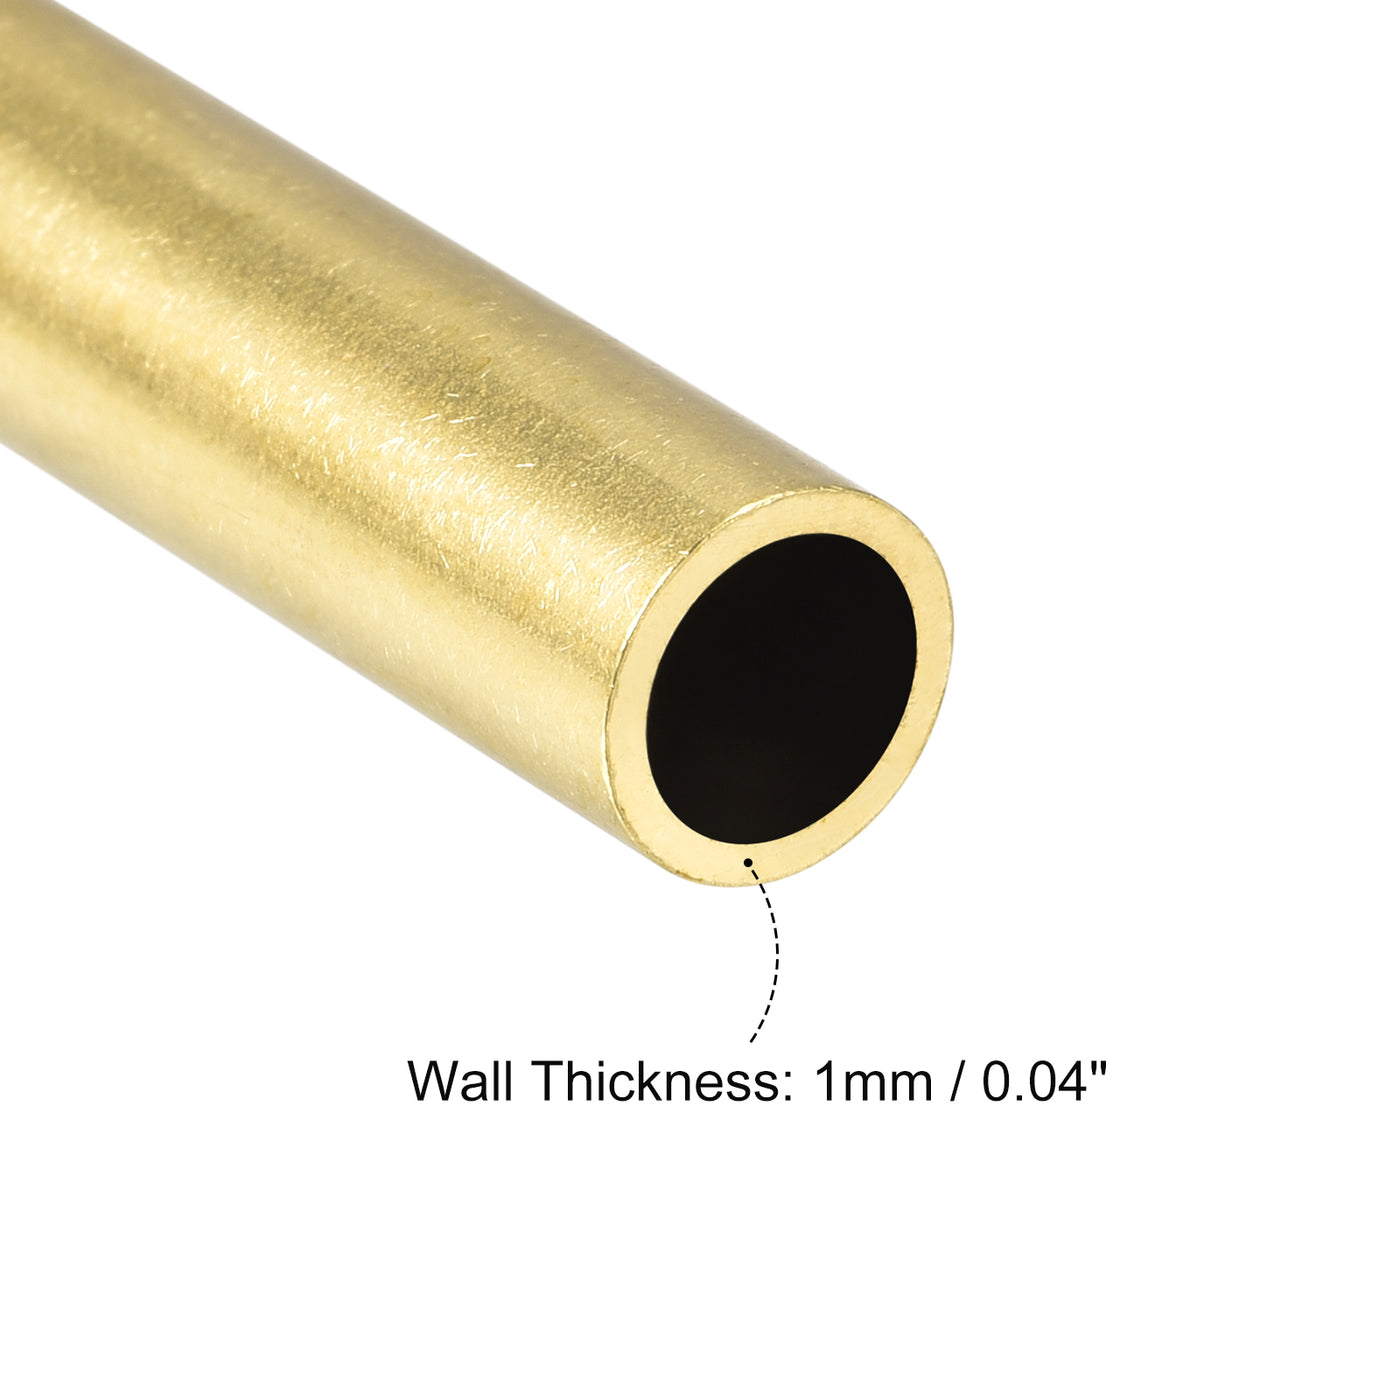 Uxcell Uxcell Brass Tube 10.5mm OD 1mm Wall Thickness 30mm Length Pipe Tubing for DIY 12 Pcs